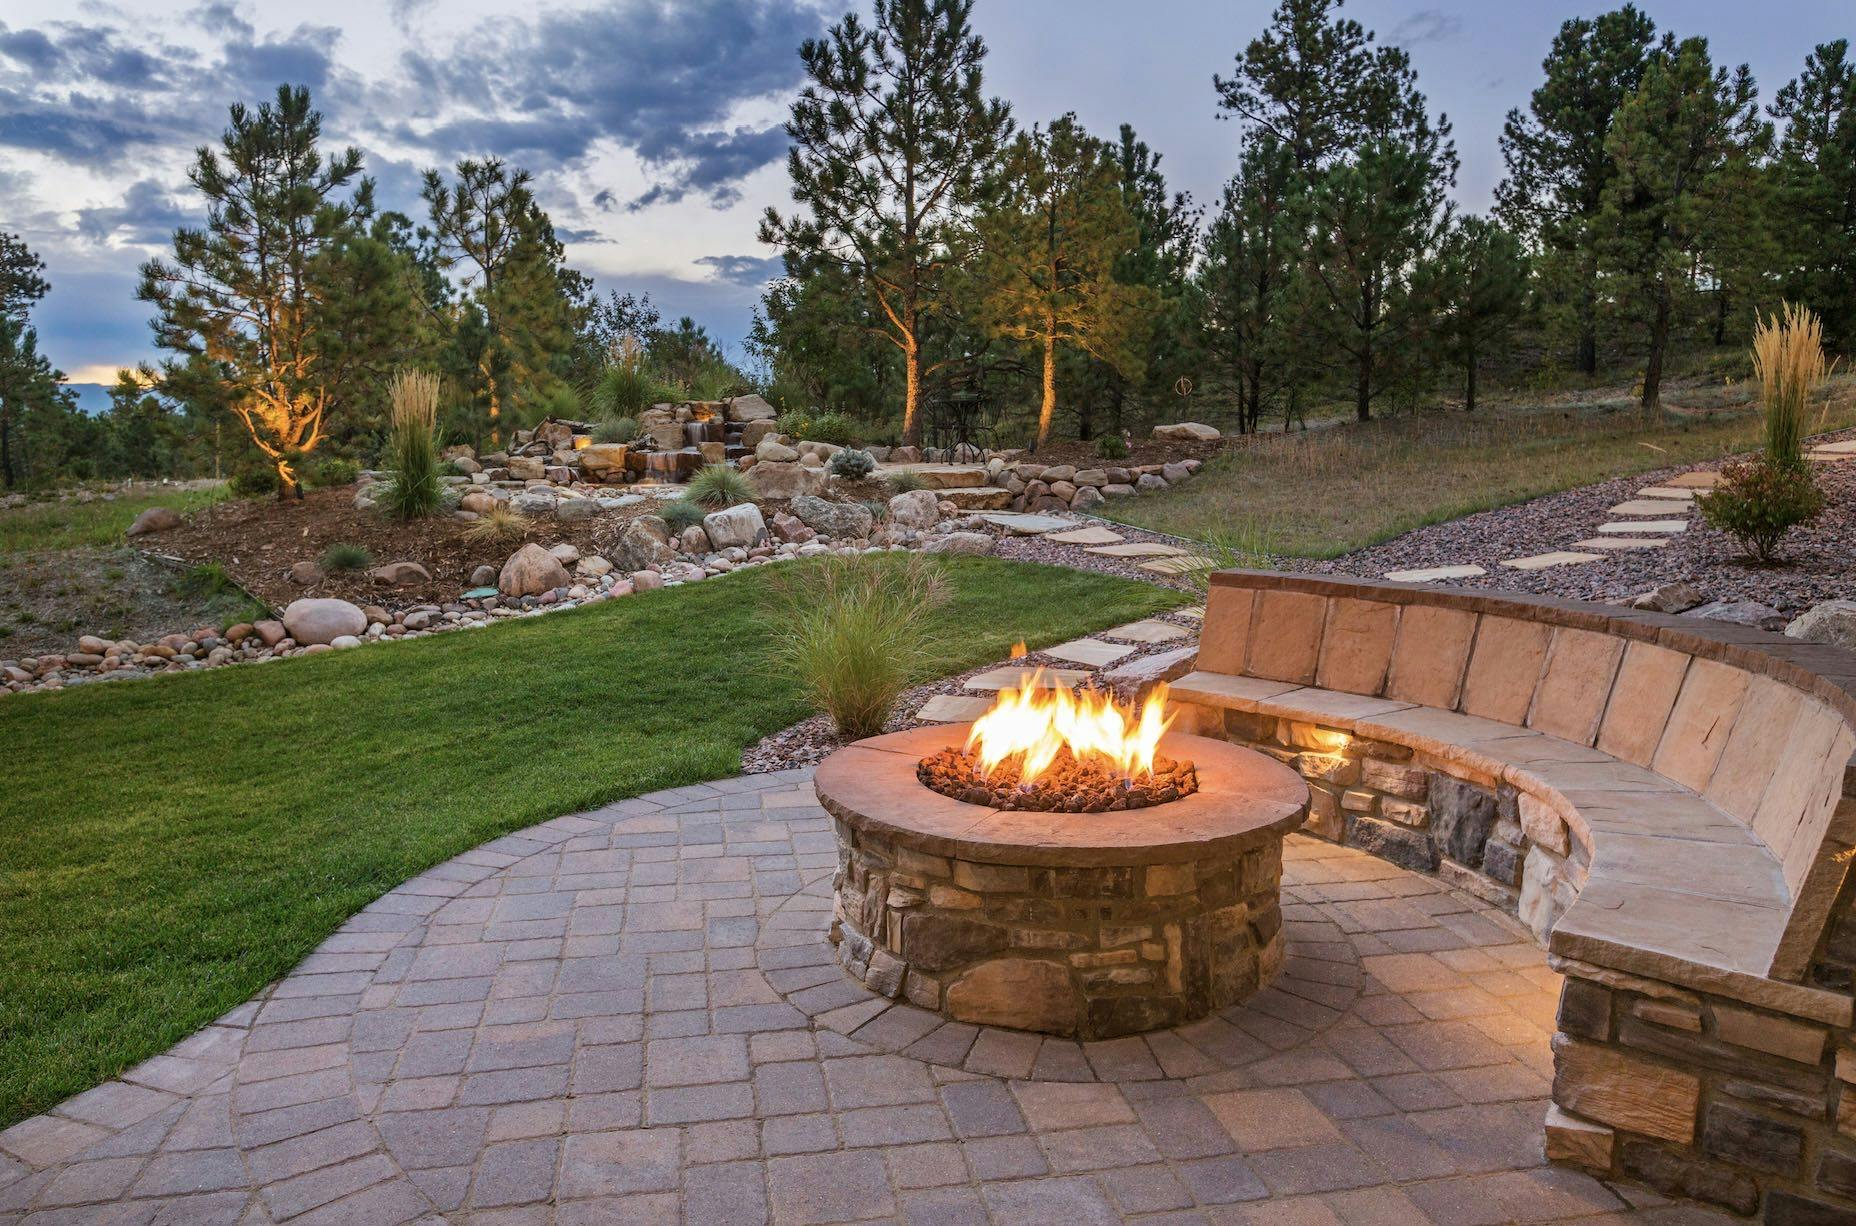 An outdoor firepit with on a patio with stone seating